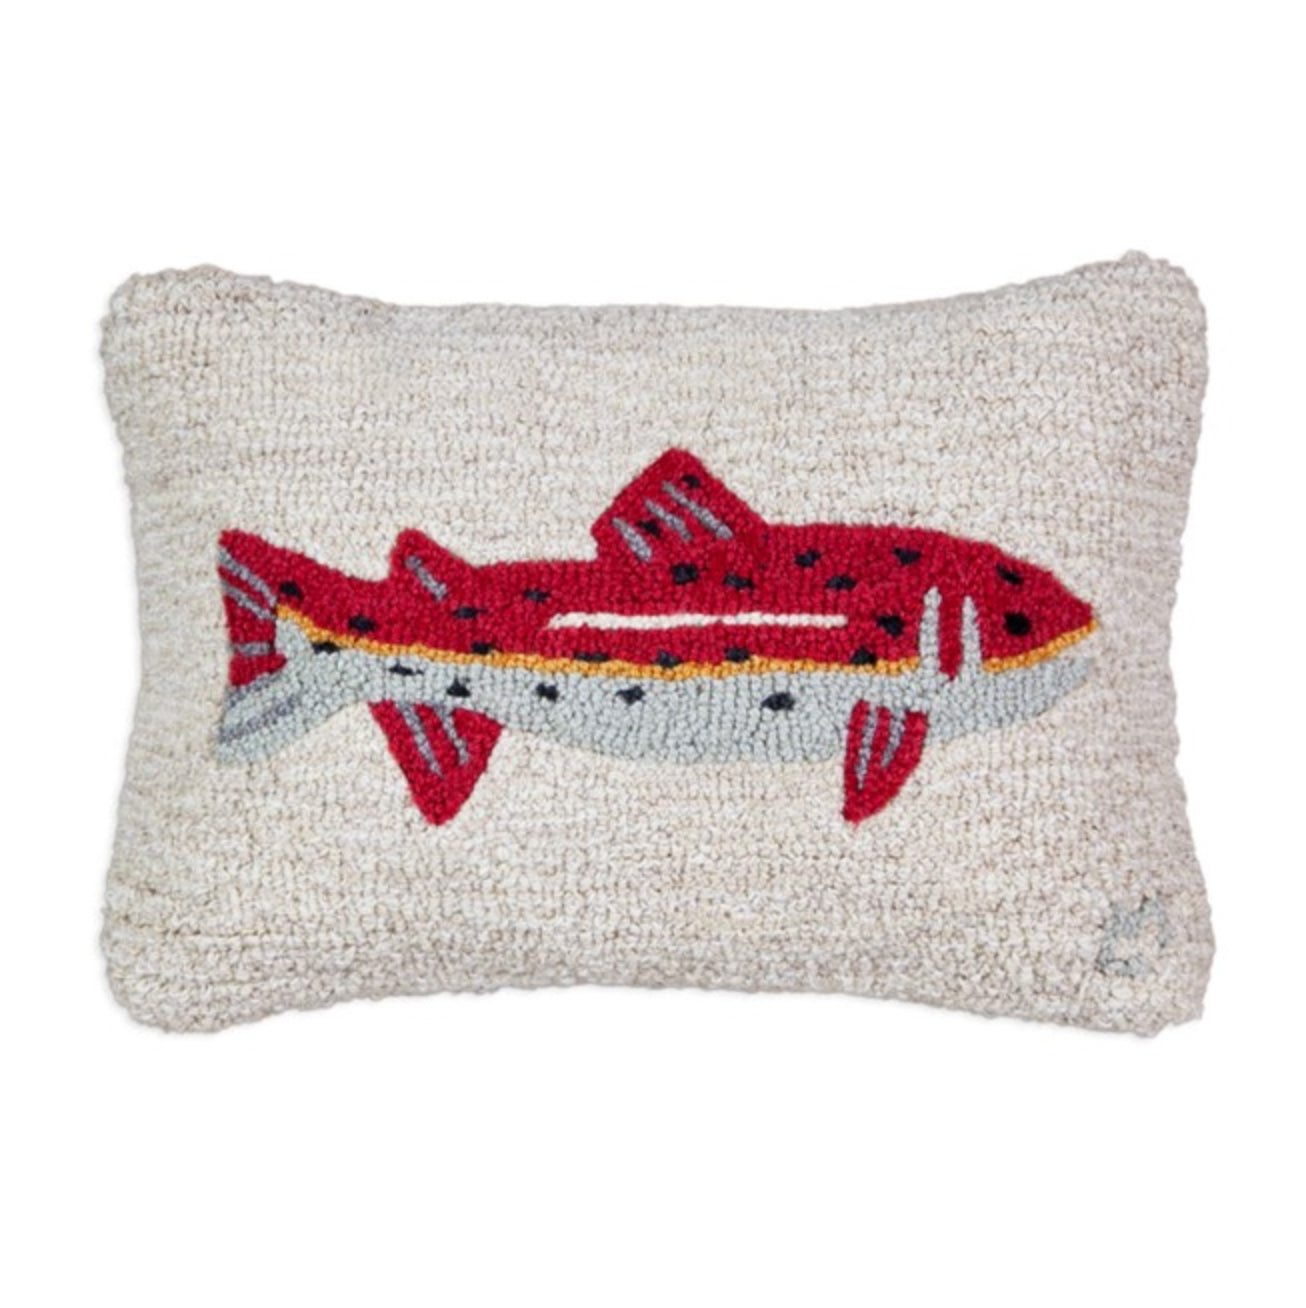 Summer Trout - Hooked Wool Pillow